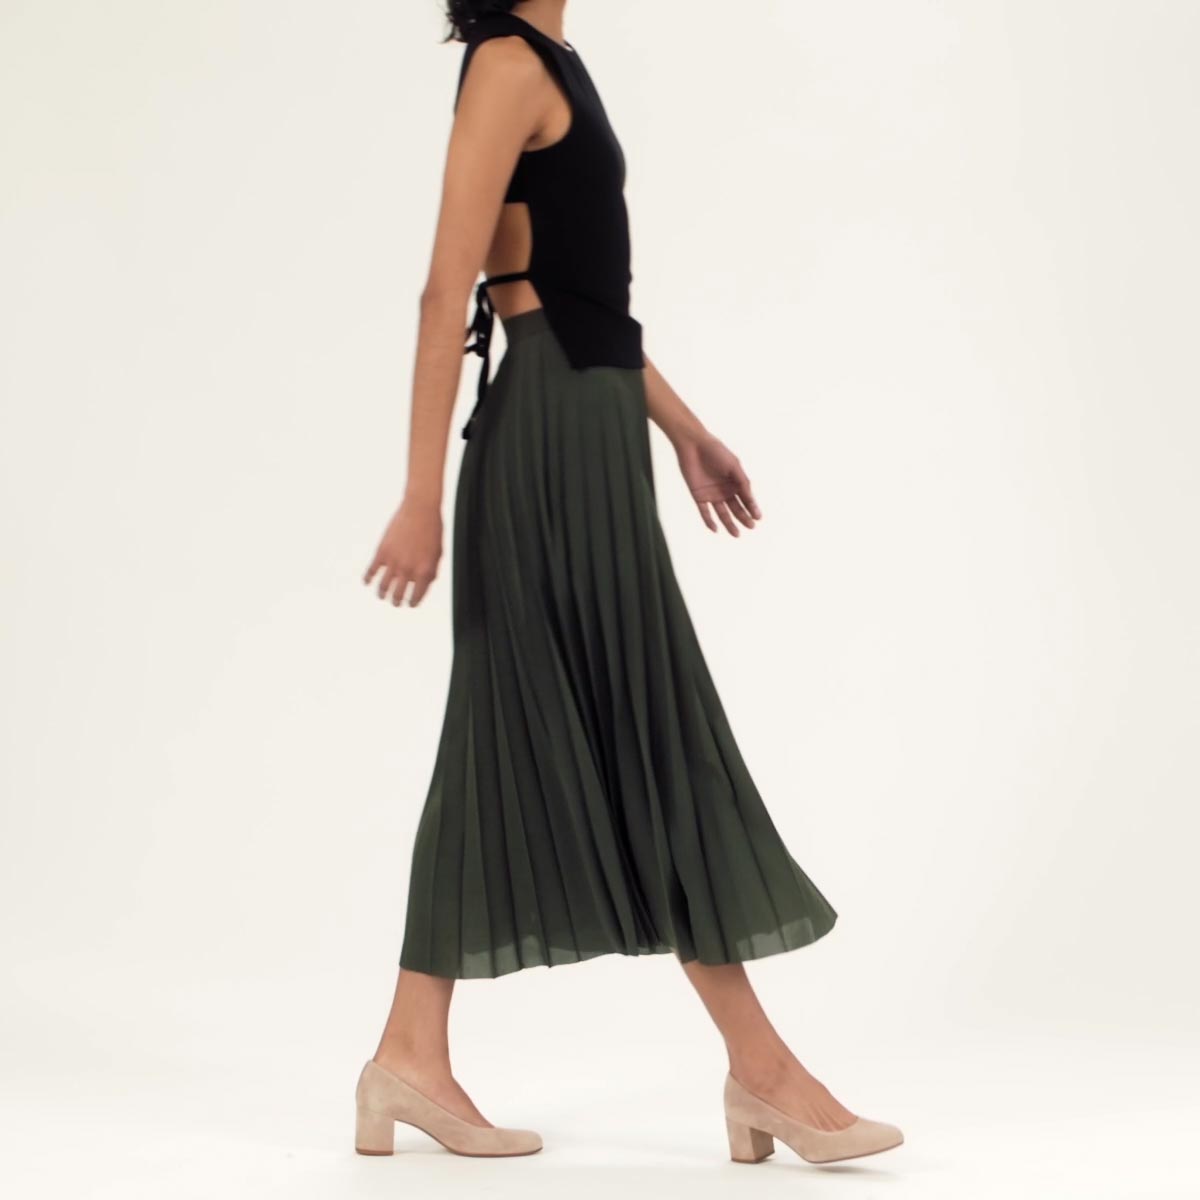 The Heel in Fawn Suede shown on model styled with a green pleated midi skirt and black sleeveless top with an open back.